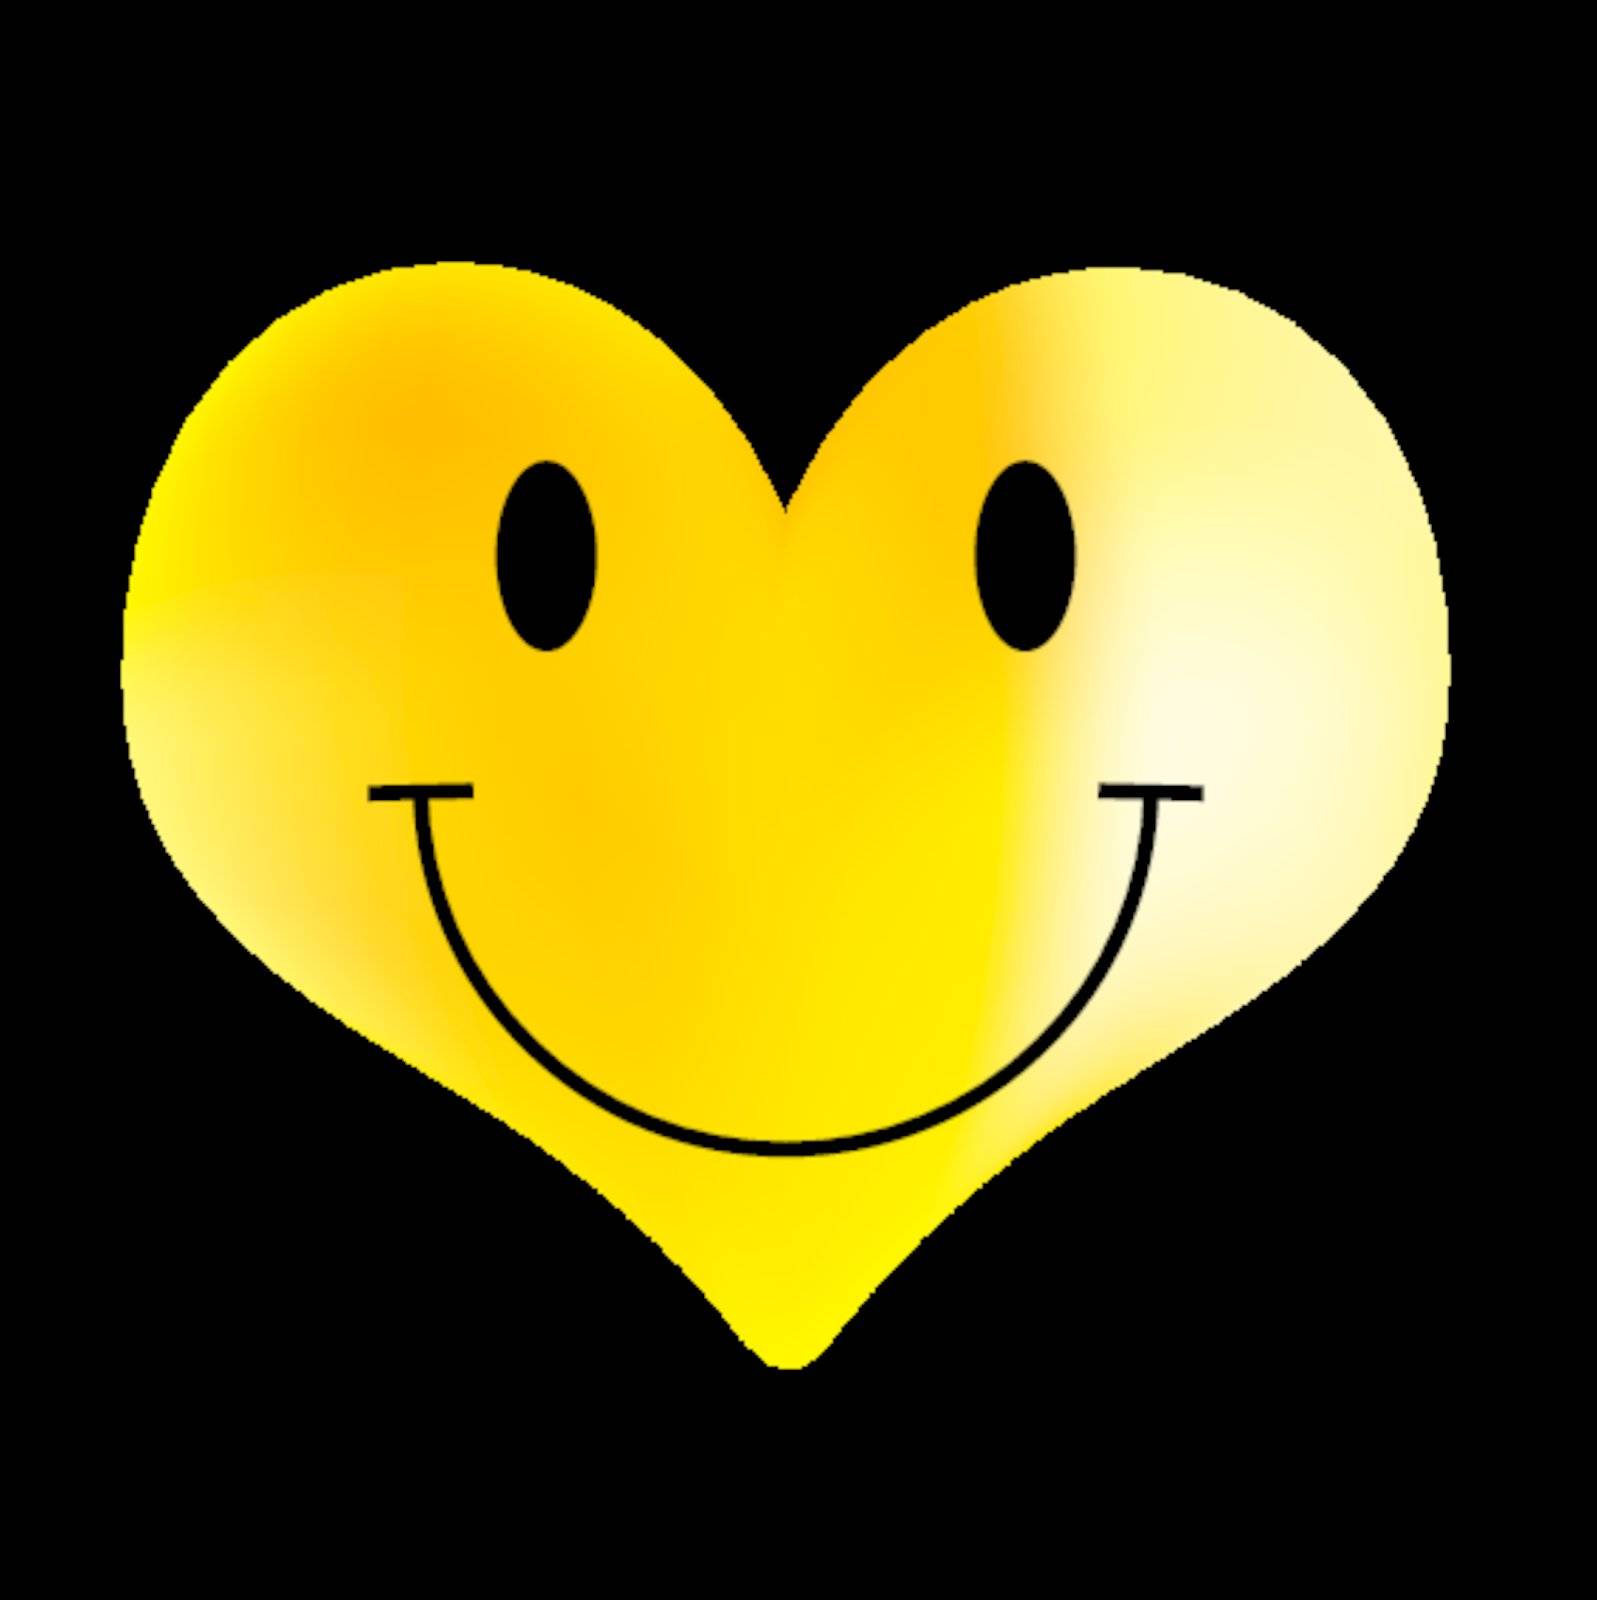 Yellow Smiley - Heart Shaped Emoticon